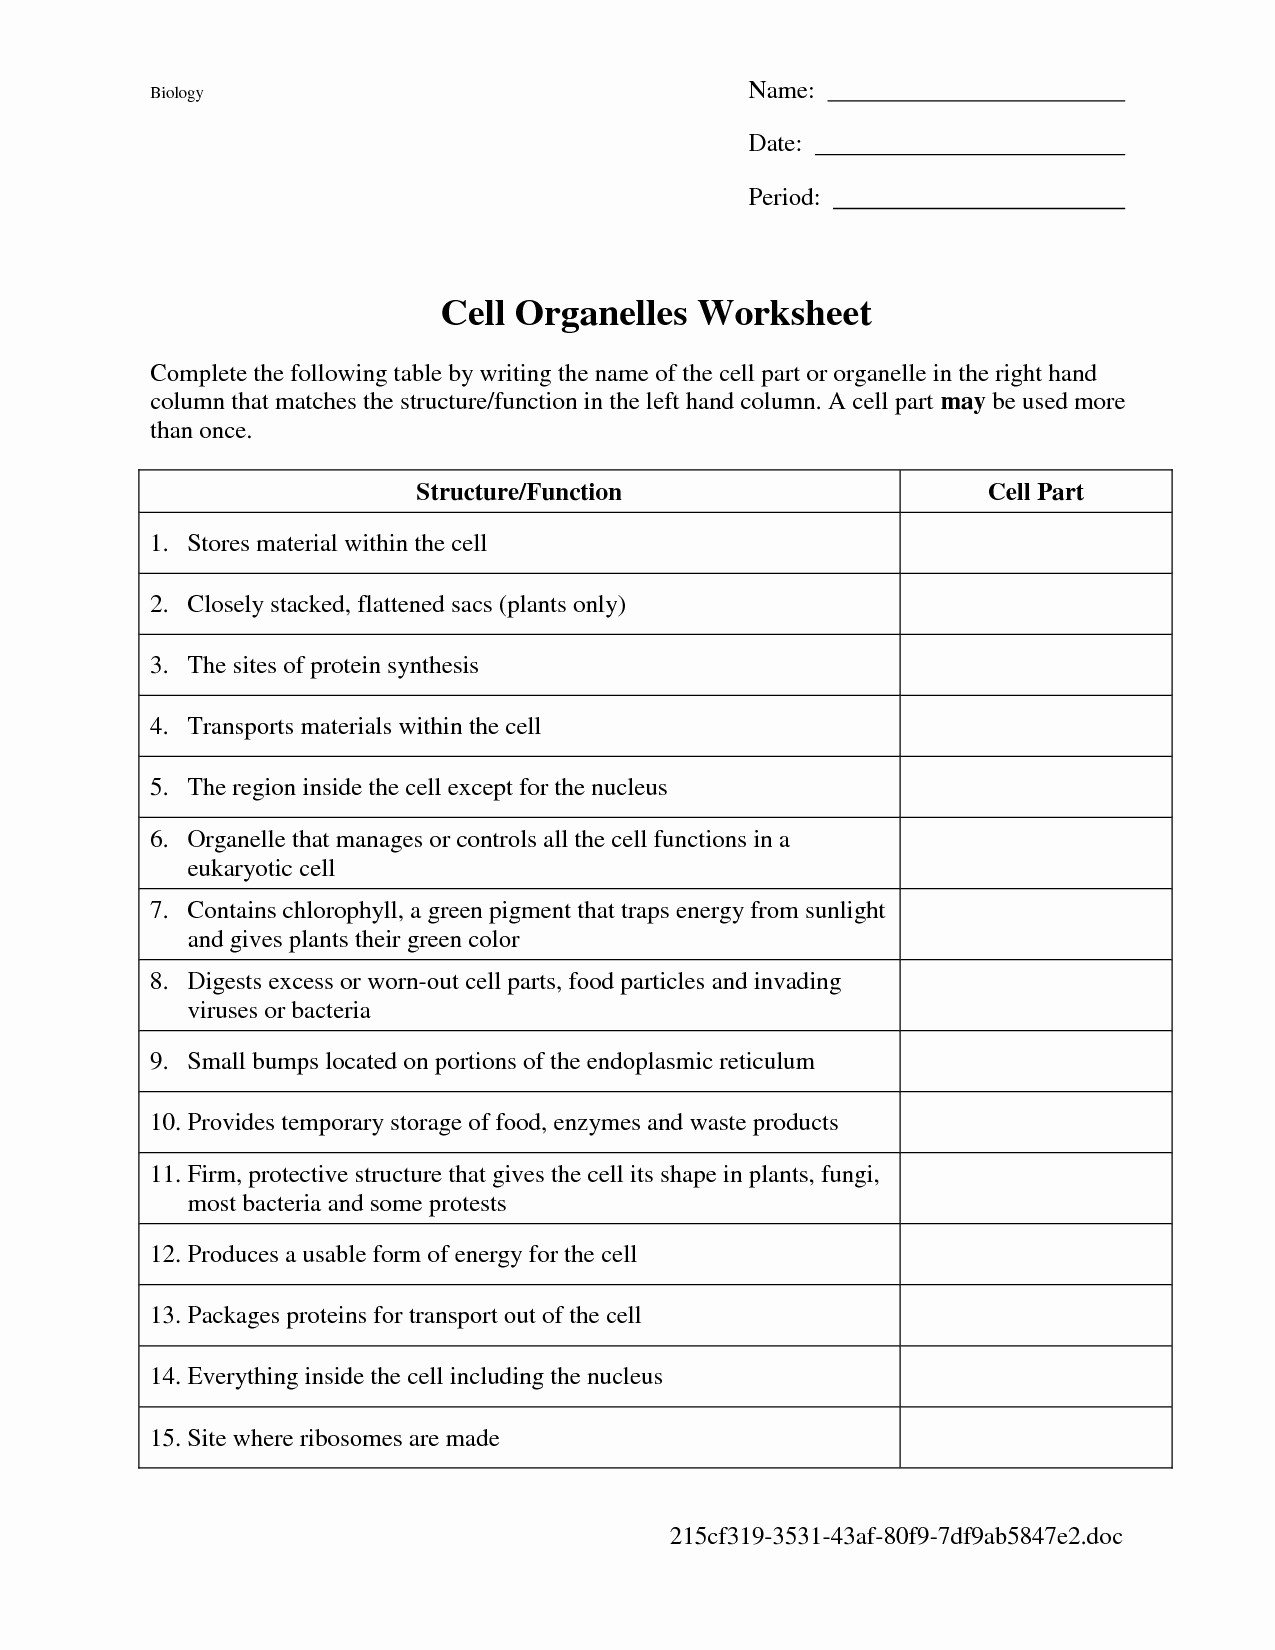 Cells and their organelles Worksheet Cell organelles and Functions Worksheet